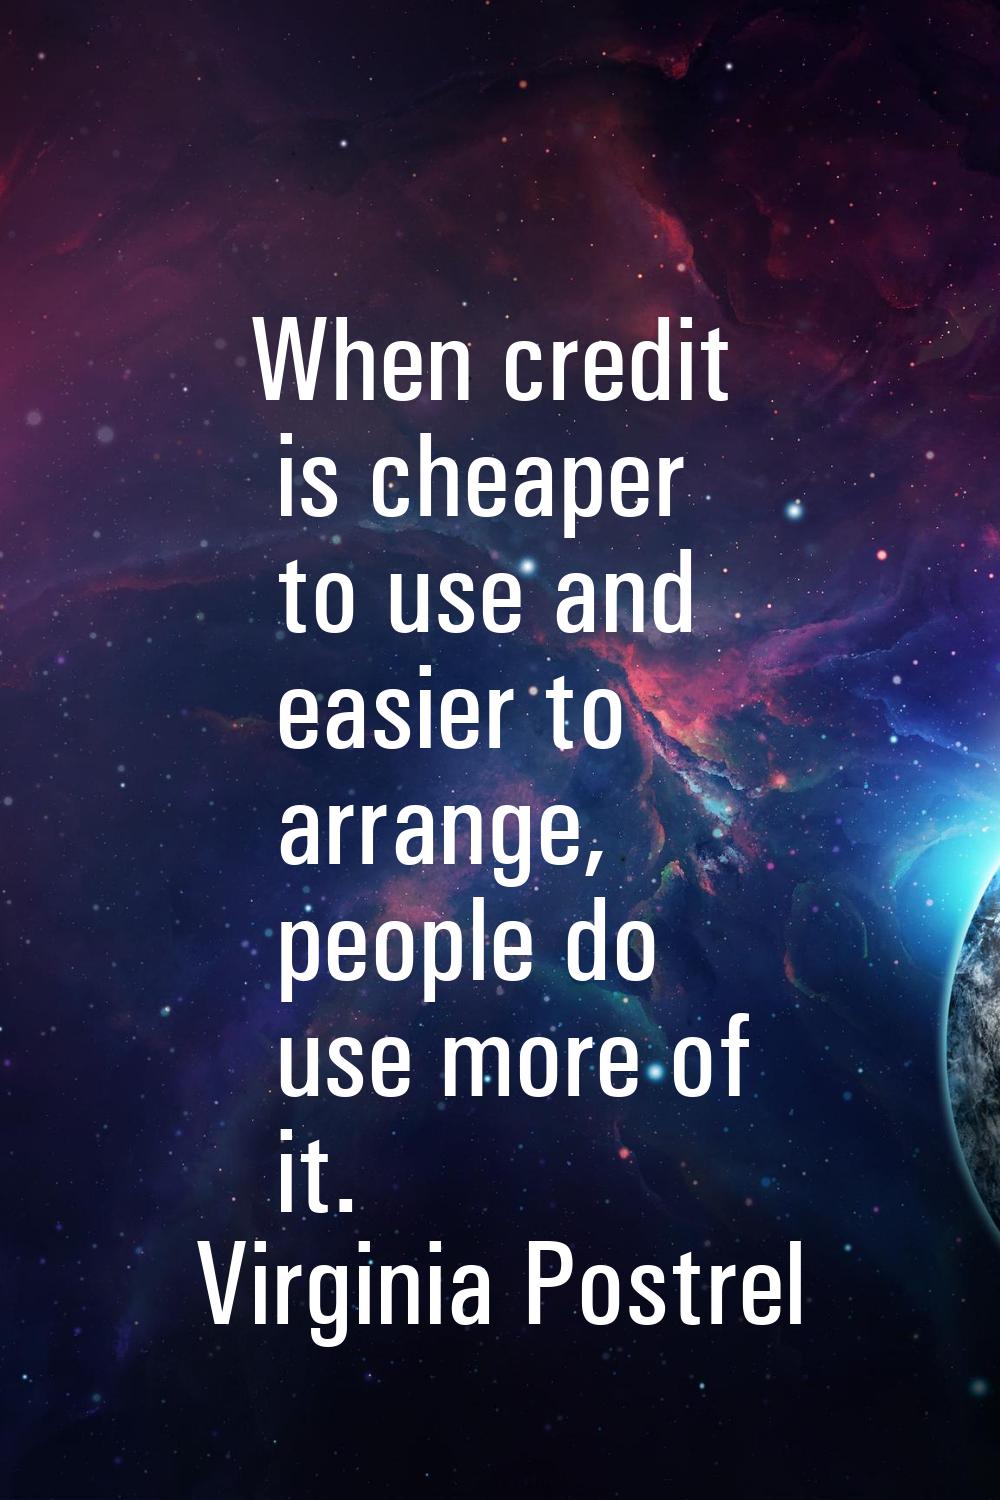 When credit is cheaper to use and easier to arrange, people do use more of it.